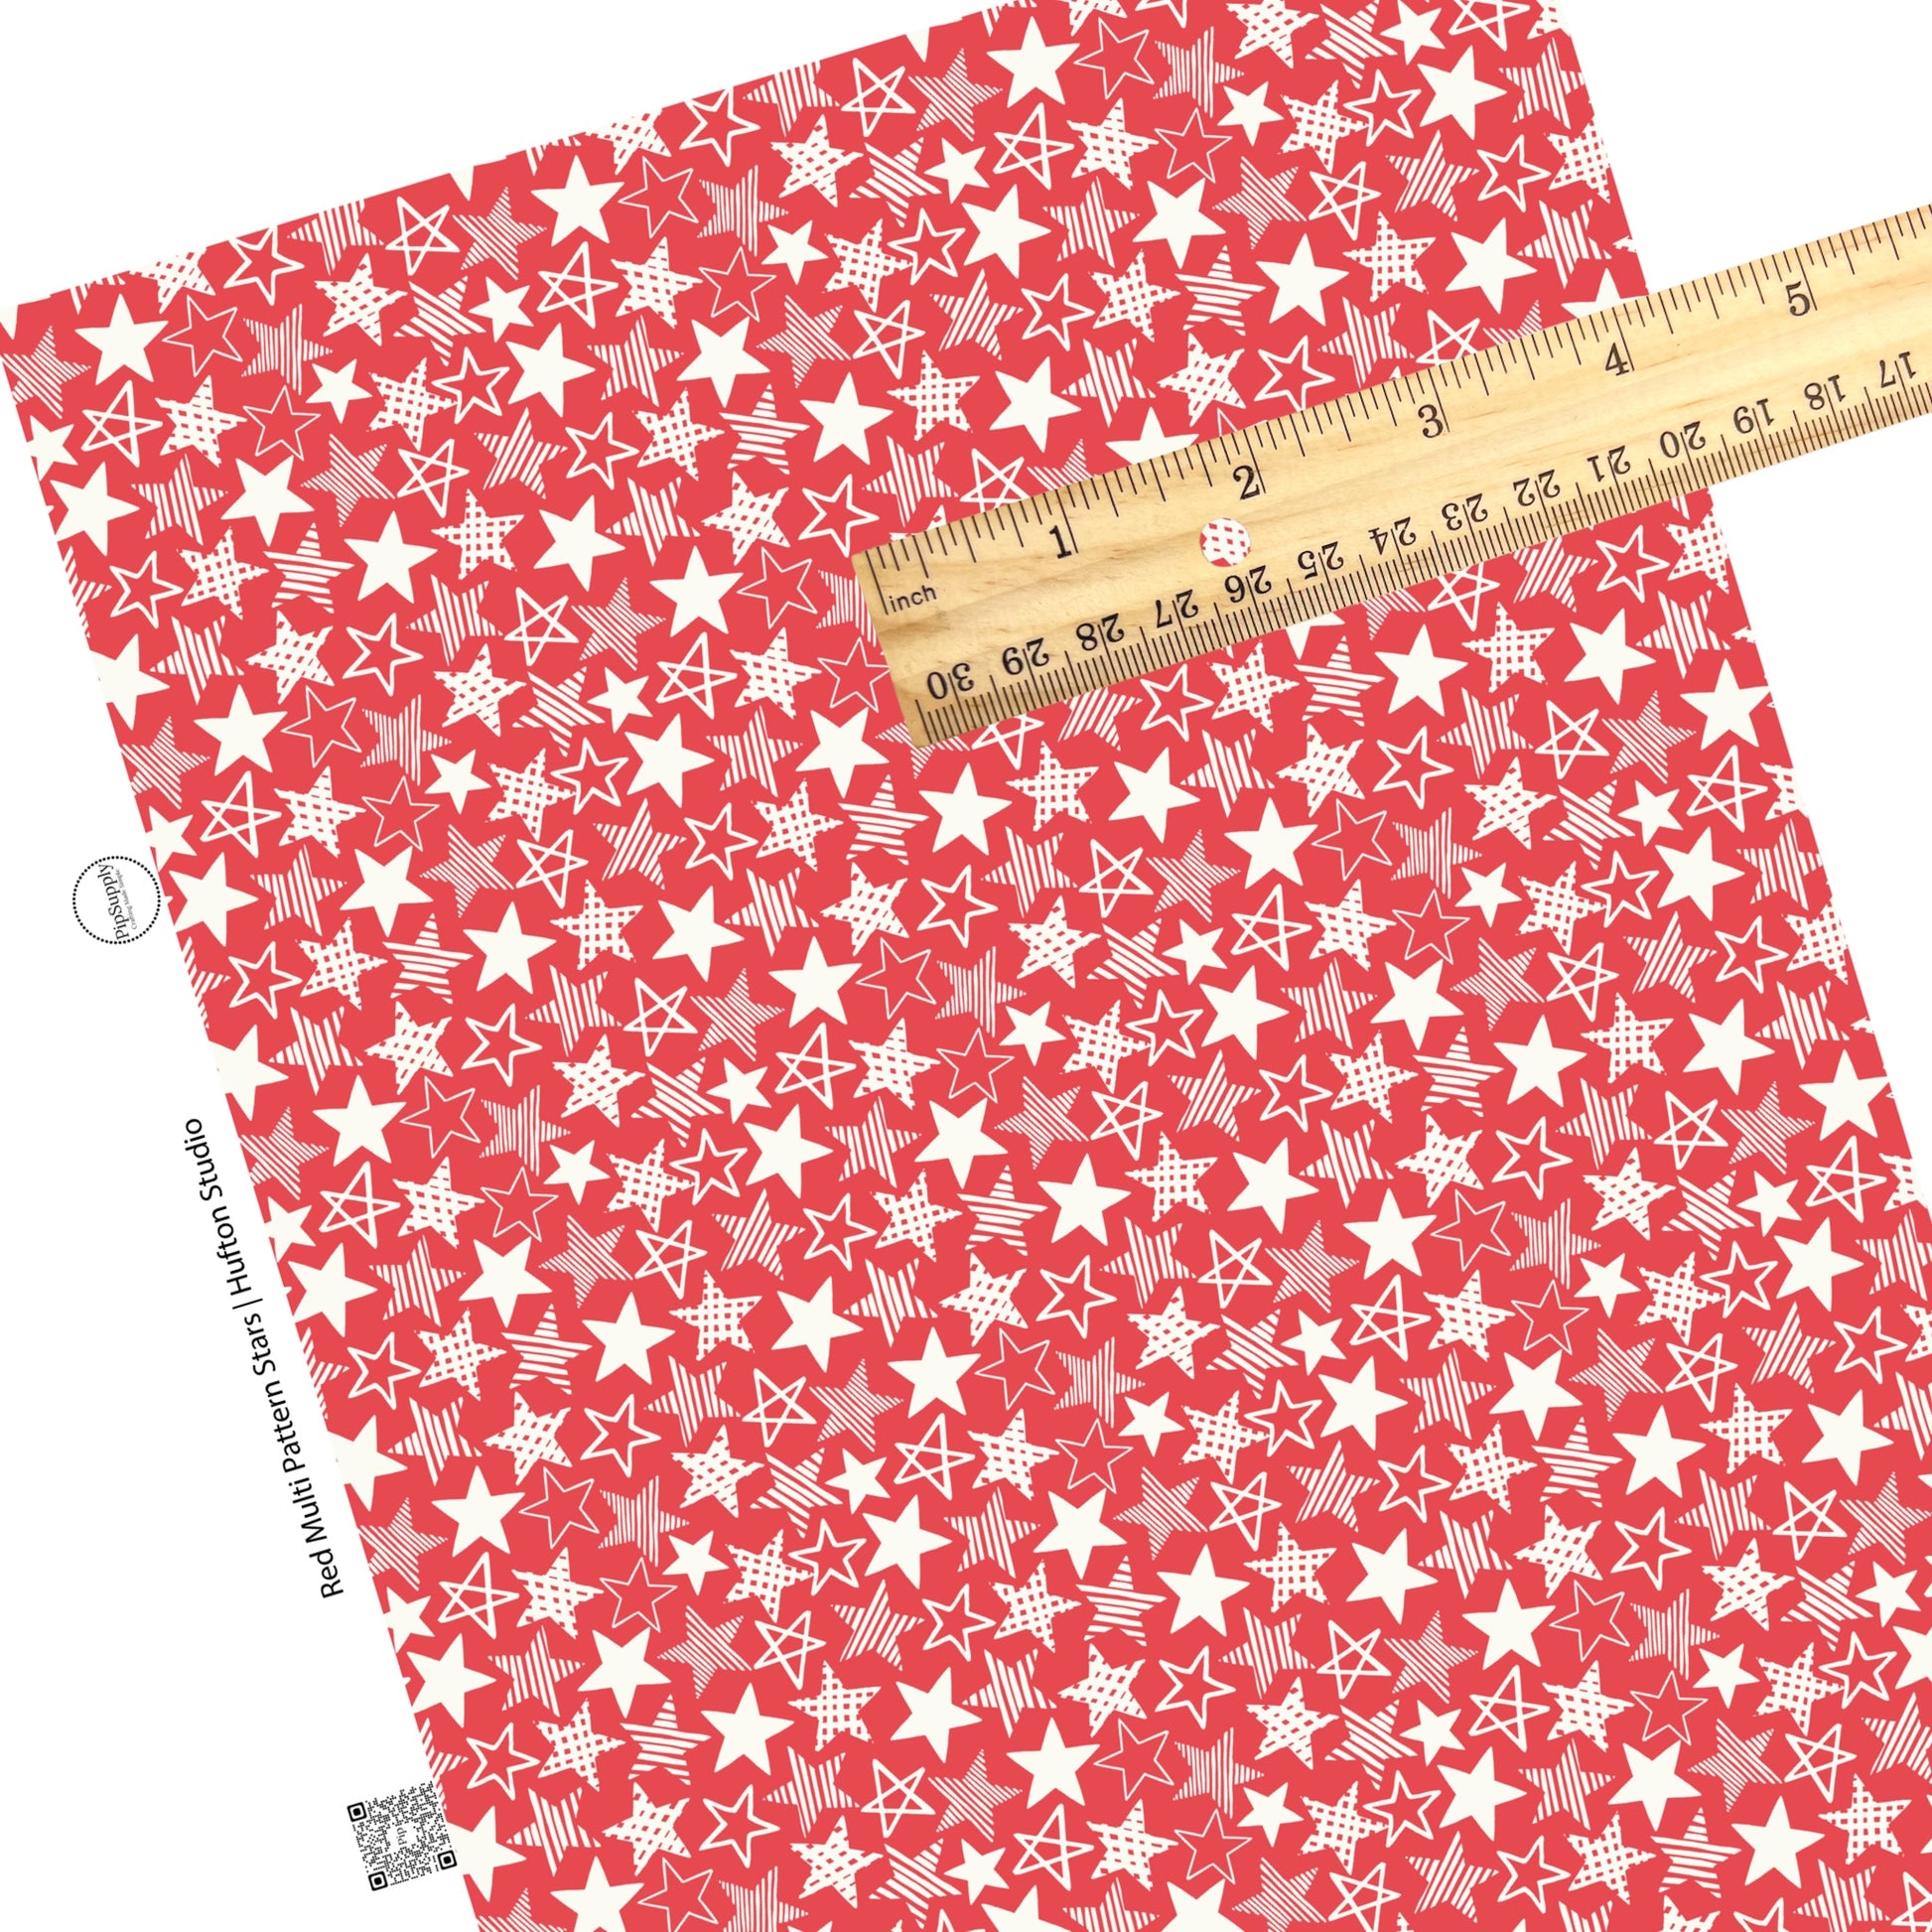 These 4th of July faux leather sheets contain the following design elements: patriotic white patterned stars on red. Our CPSIA compliant faux leather sheets or rolls can be used for all types of crafting projects.